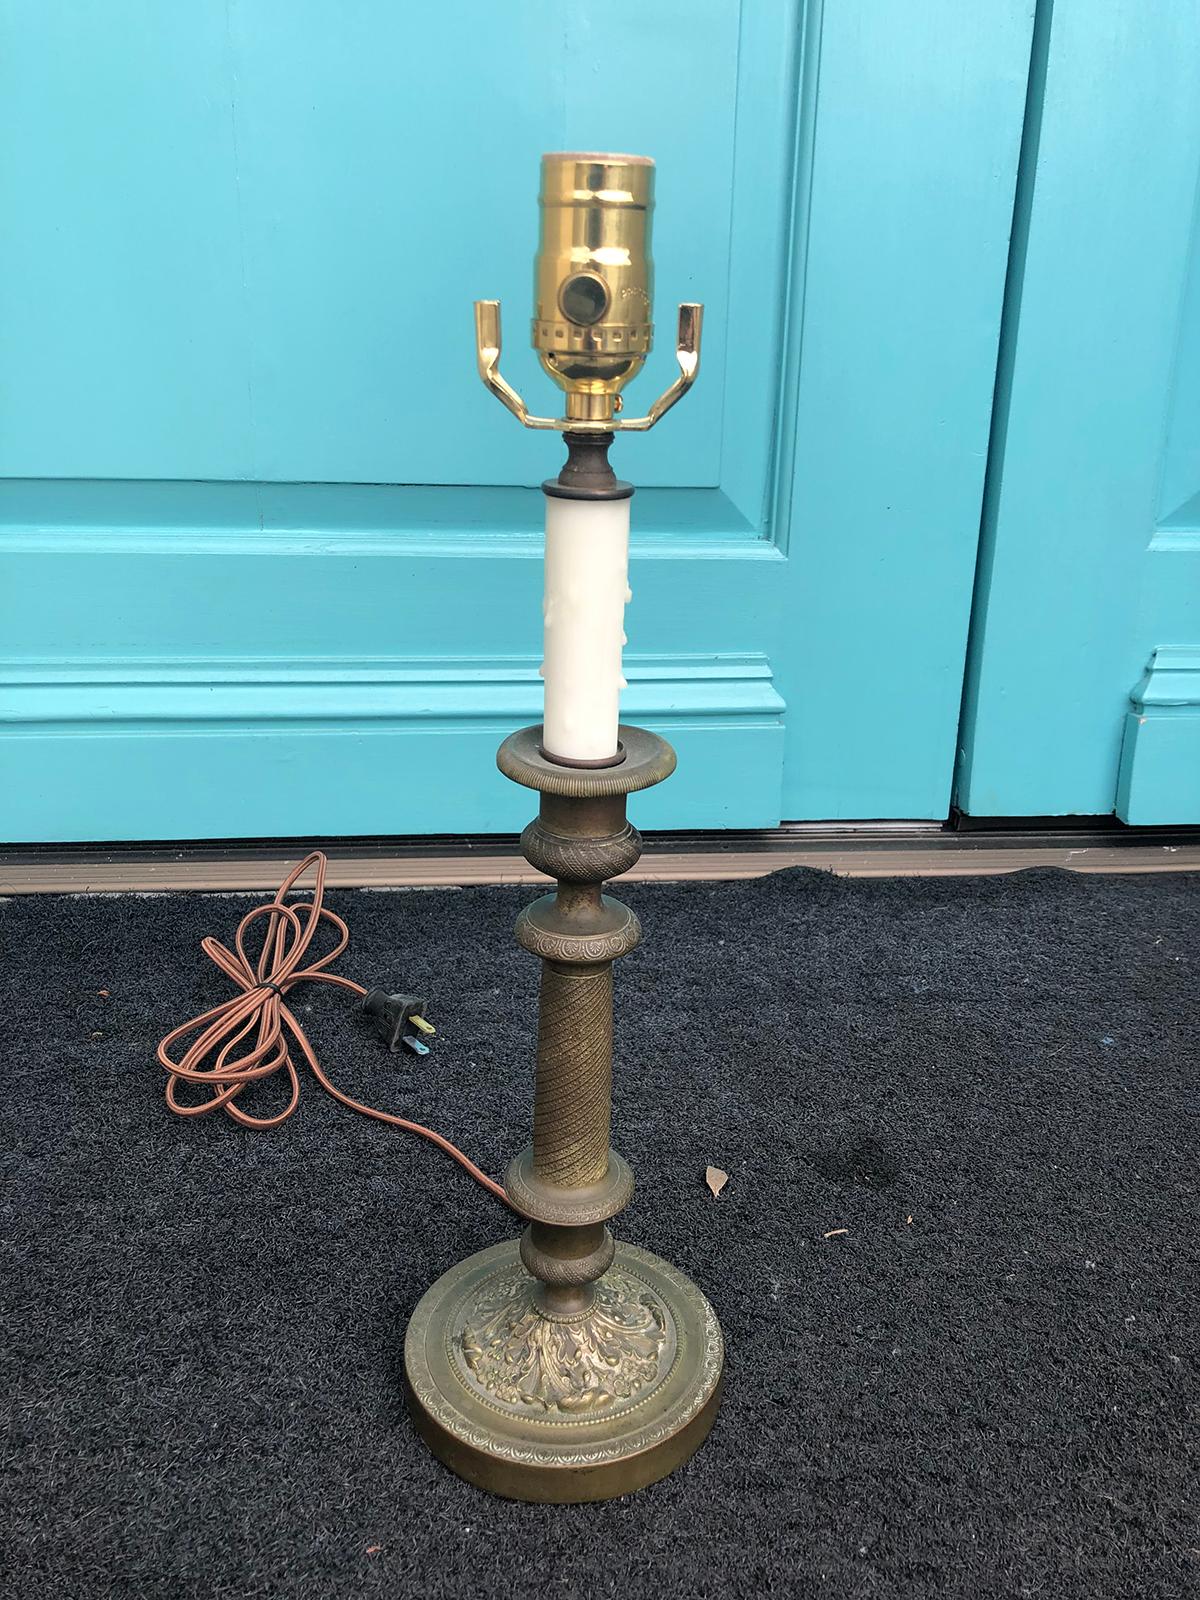 19th century French bronze candlestick as lamp
New wiring.